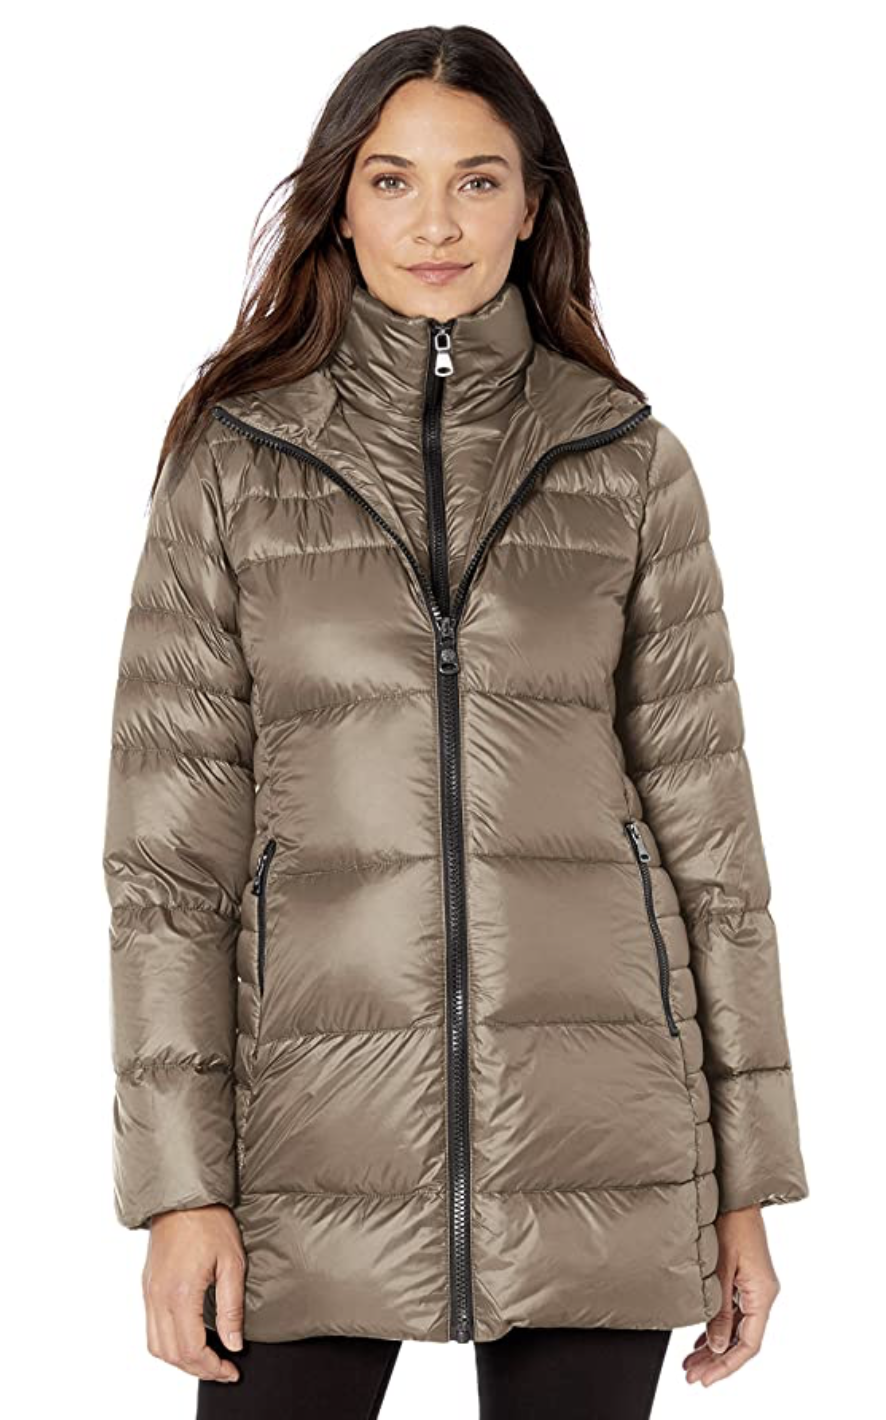 Taylor Eddie Womens Hooded Packable Ultra Light Weight Down Coat Puffer Jacket